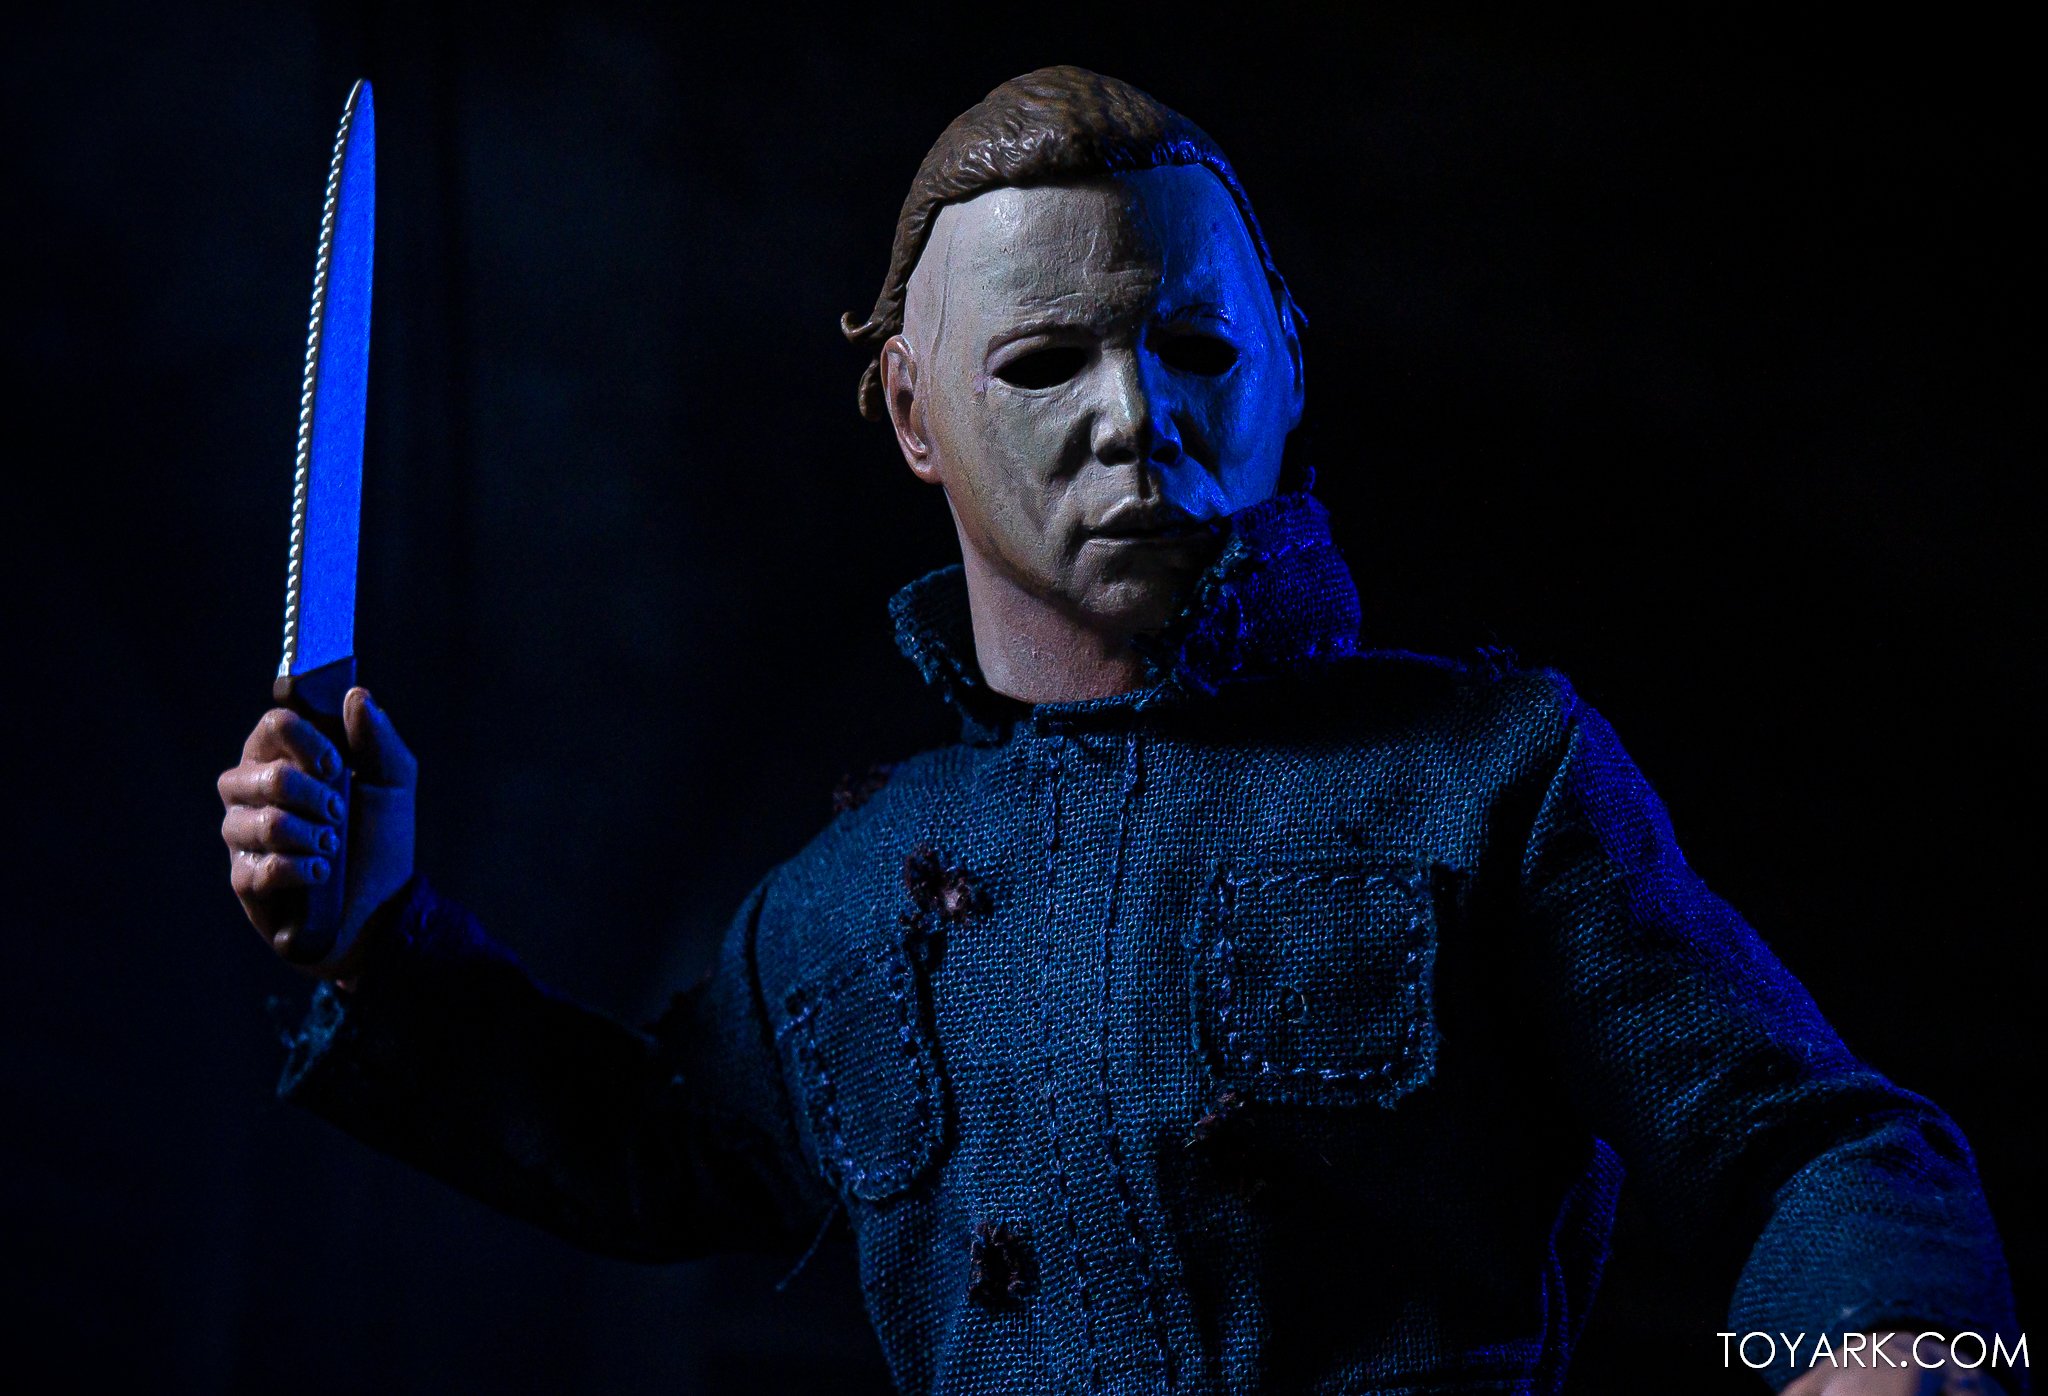 Halloween-2-Clothed-Michael-Myers-034.jpg